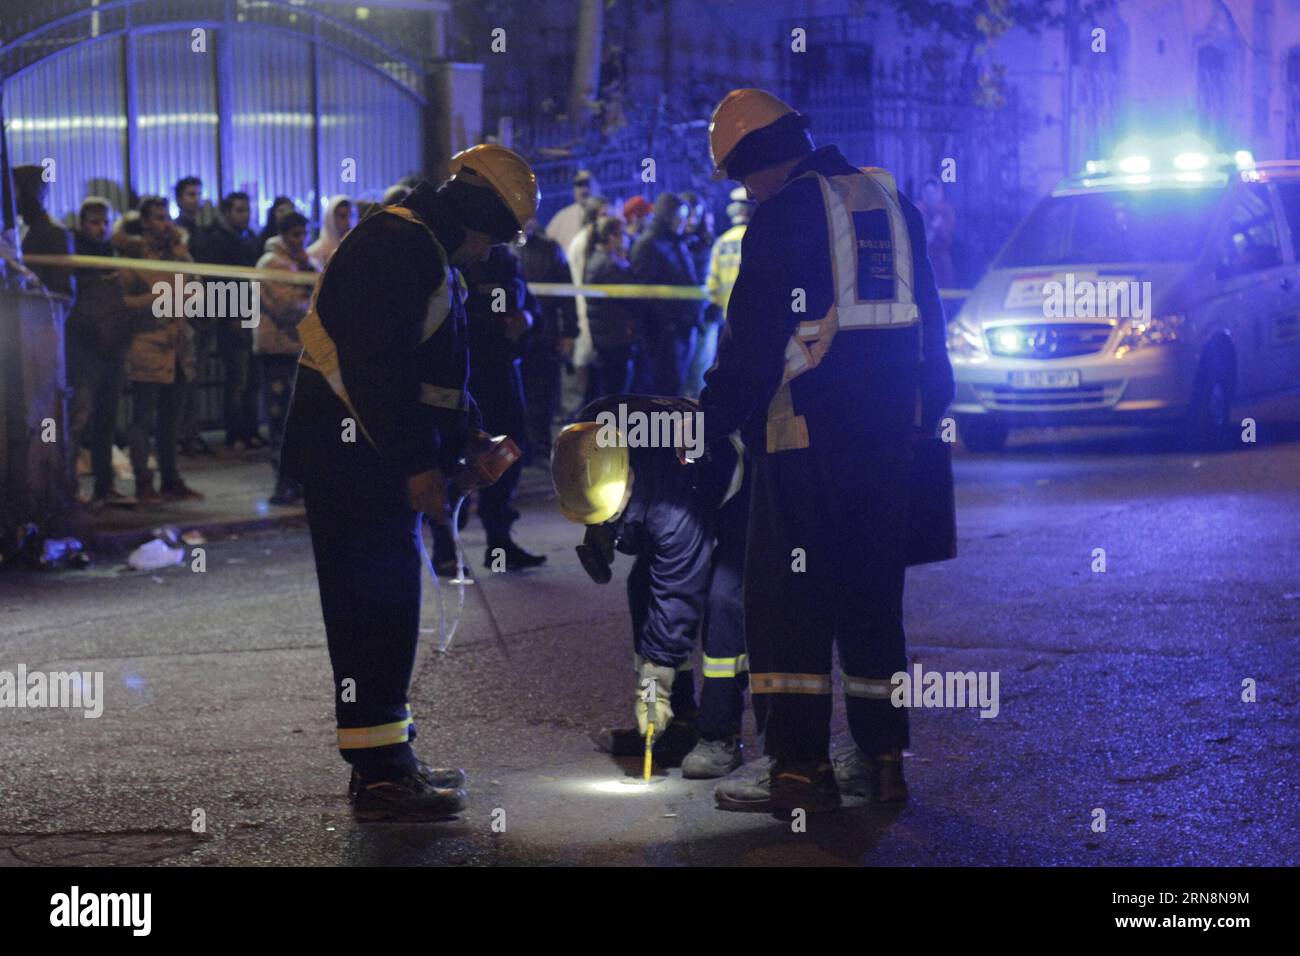 (151031) -- BUCHAREST, Oct. 31, 2015 -- Firemen gather at the nightclub which caught fire in Bucharest, capital city of Romania, Oct. 31, 2015. The nightclub fire late Friday followed by explosions has already caused 26 dead and some 180 wounded in downtown Bucharest, authorities announced early Saturday. ) ROMANIA-BUCHAREST-NIGHTCLUB-FIRE GabrielxPetrescu PUBLICATIONxNOTxINxCHN Rumänien: Tote und Verletzte nach Feuer in Nachtclub in Bukarest   Bucharest OCT 31 2015 firemen gather AT The Night Club Which Caught Fire in Bucharest Capital City of Romania OCT 31 2015 The Night Club Fire Late Frid Stock Photo